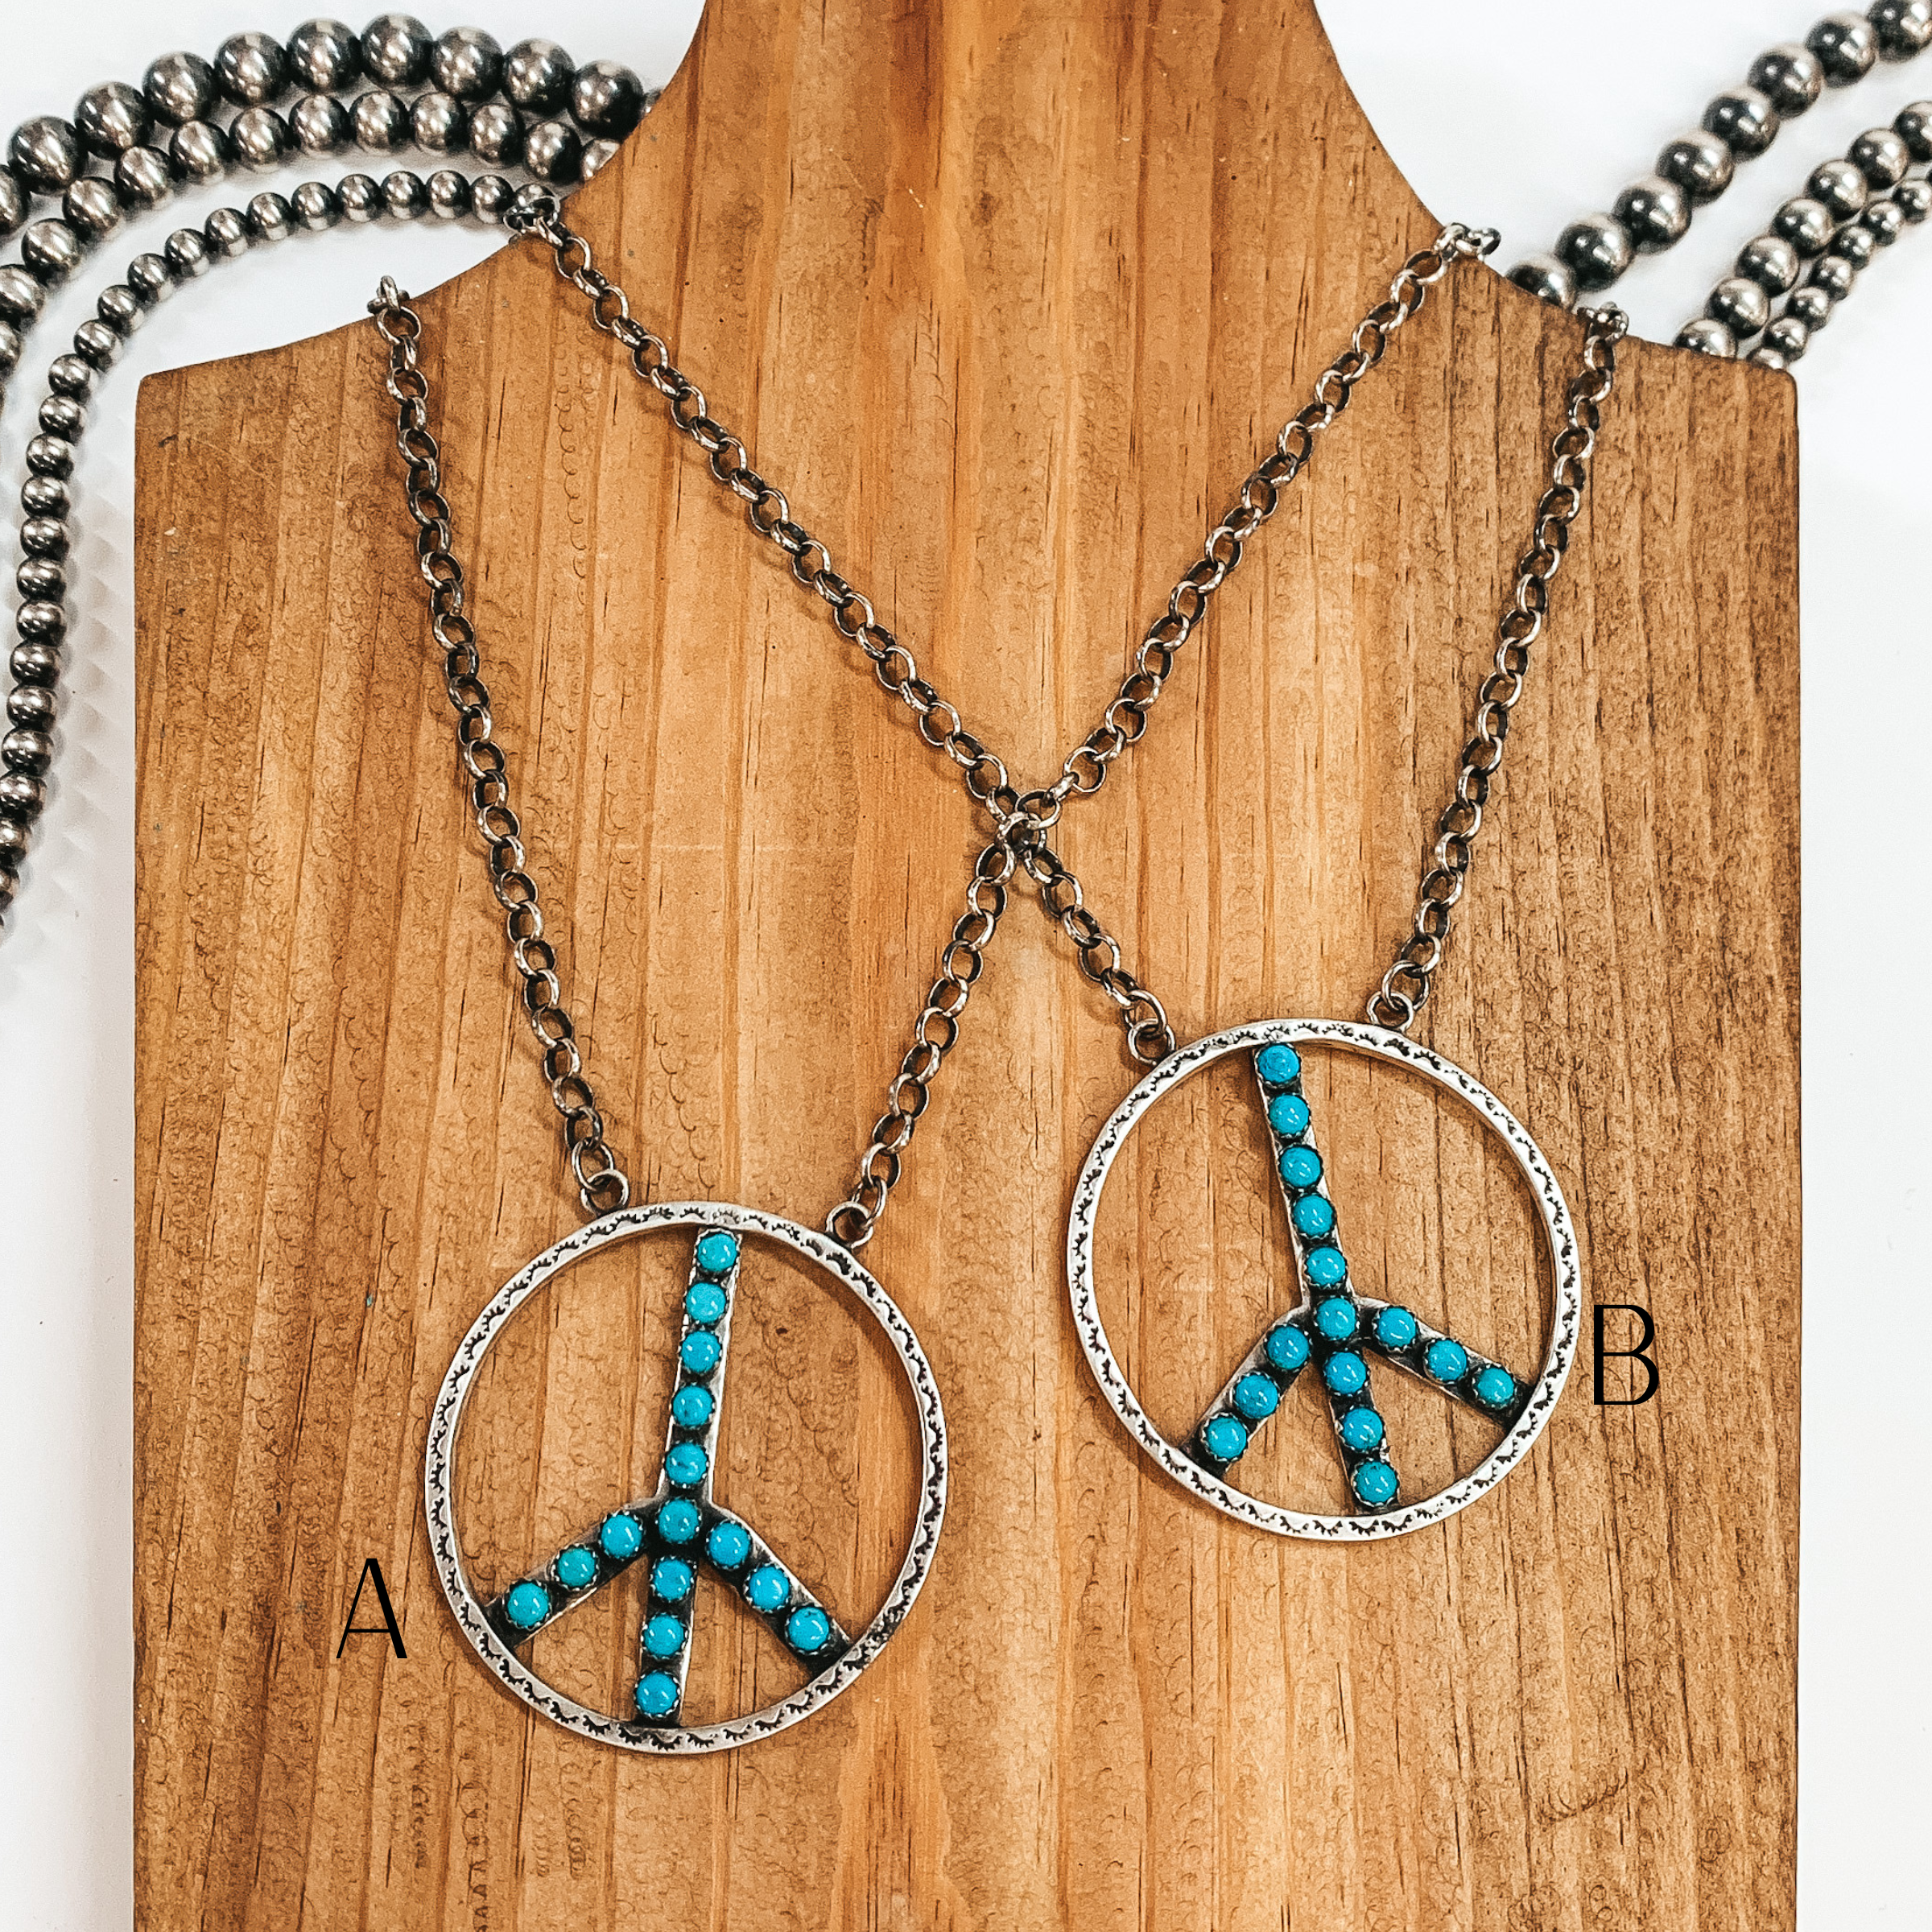 Navajo | Navajo Handmade Sterling Silver Chain Necklace with Peace Sign Pendant and Turquoise Stone Inlay - Giddy Up Glamour Boutique